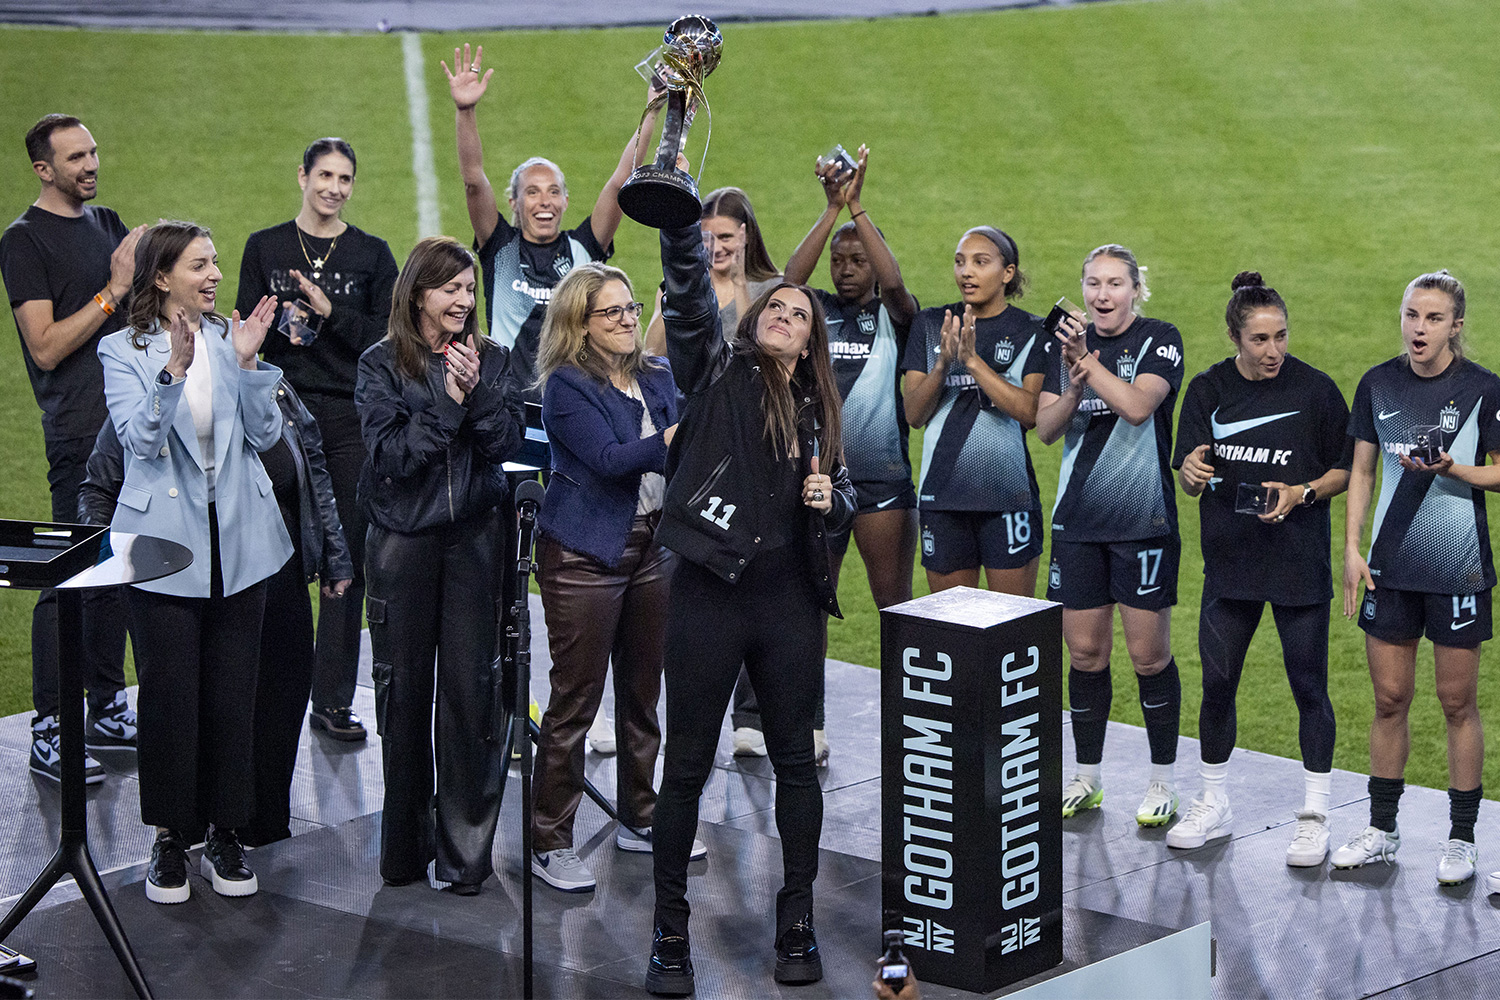 Members of Gotham FC celebrate with the NWSL Championship trophy.